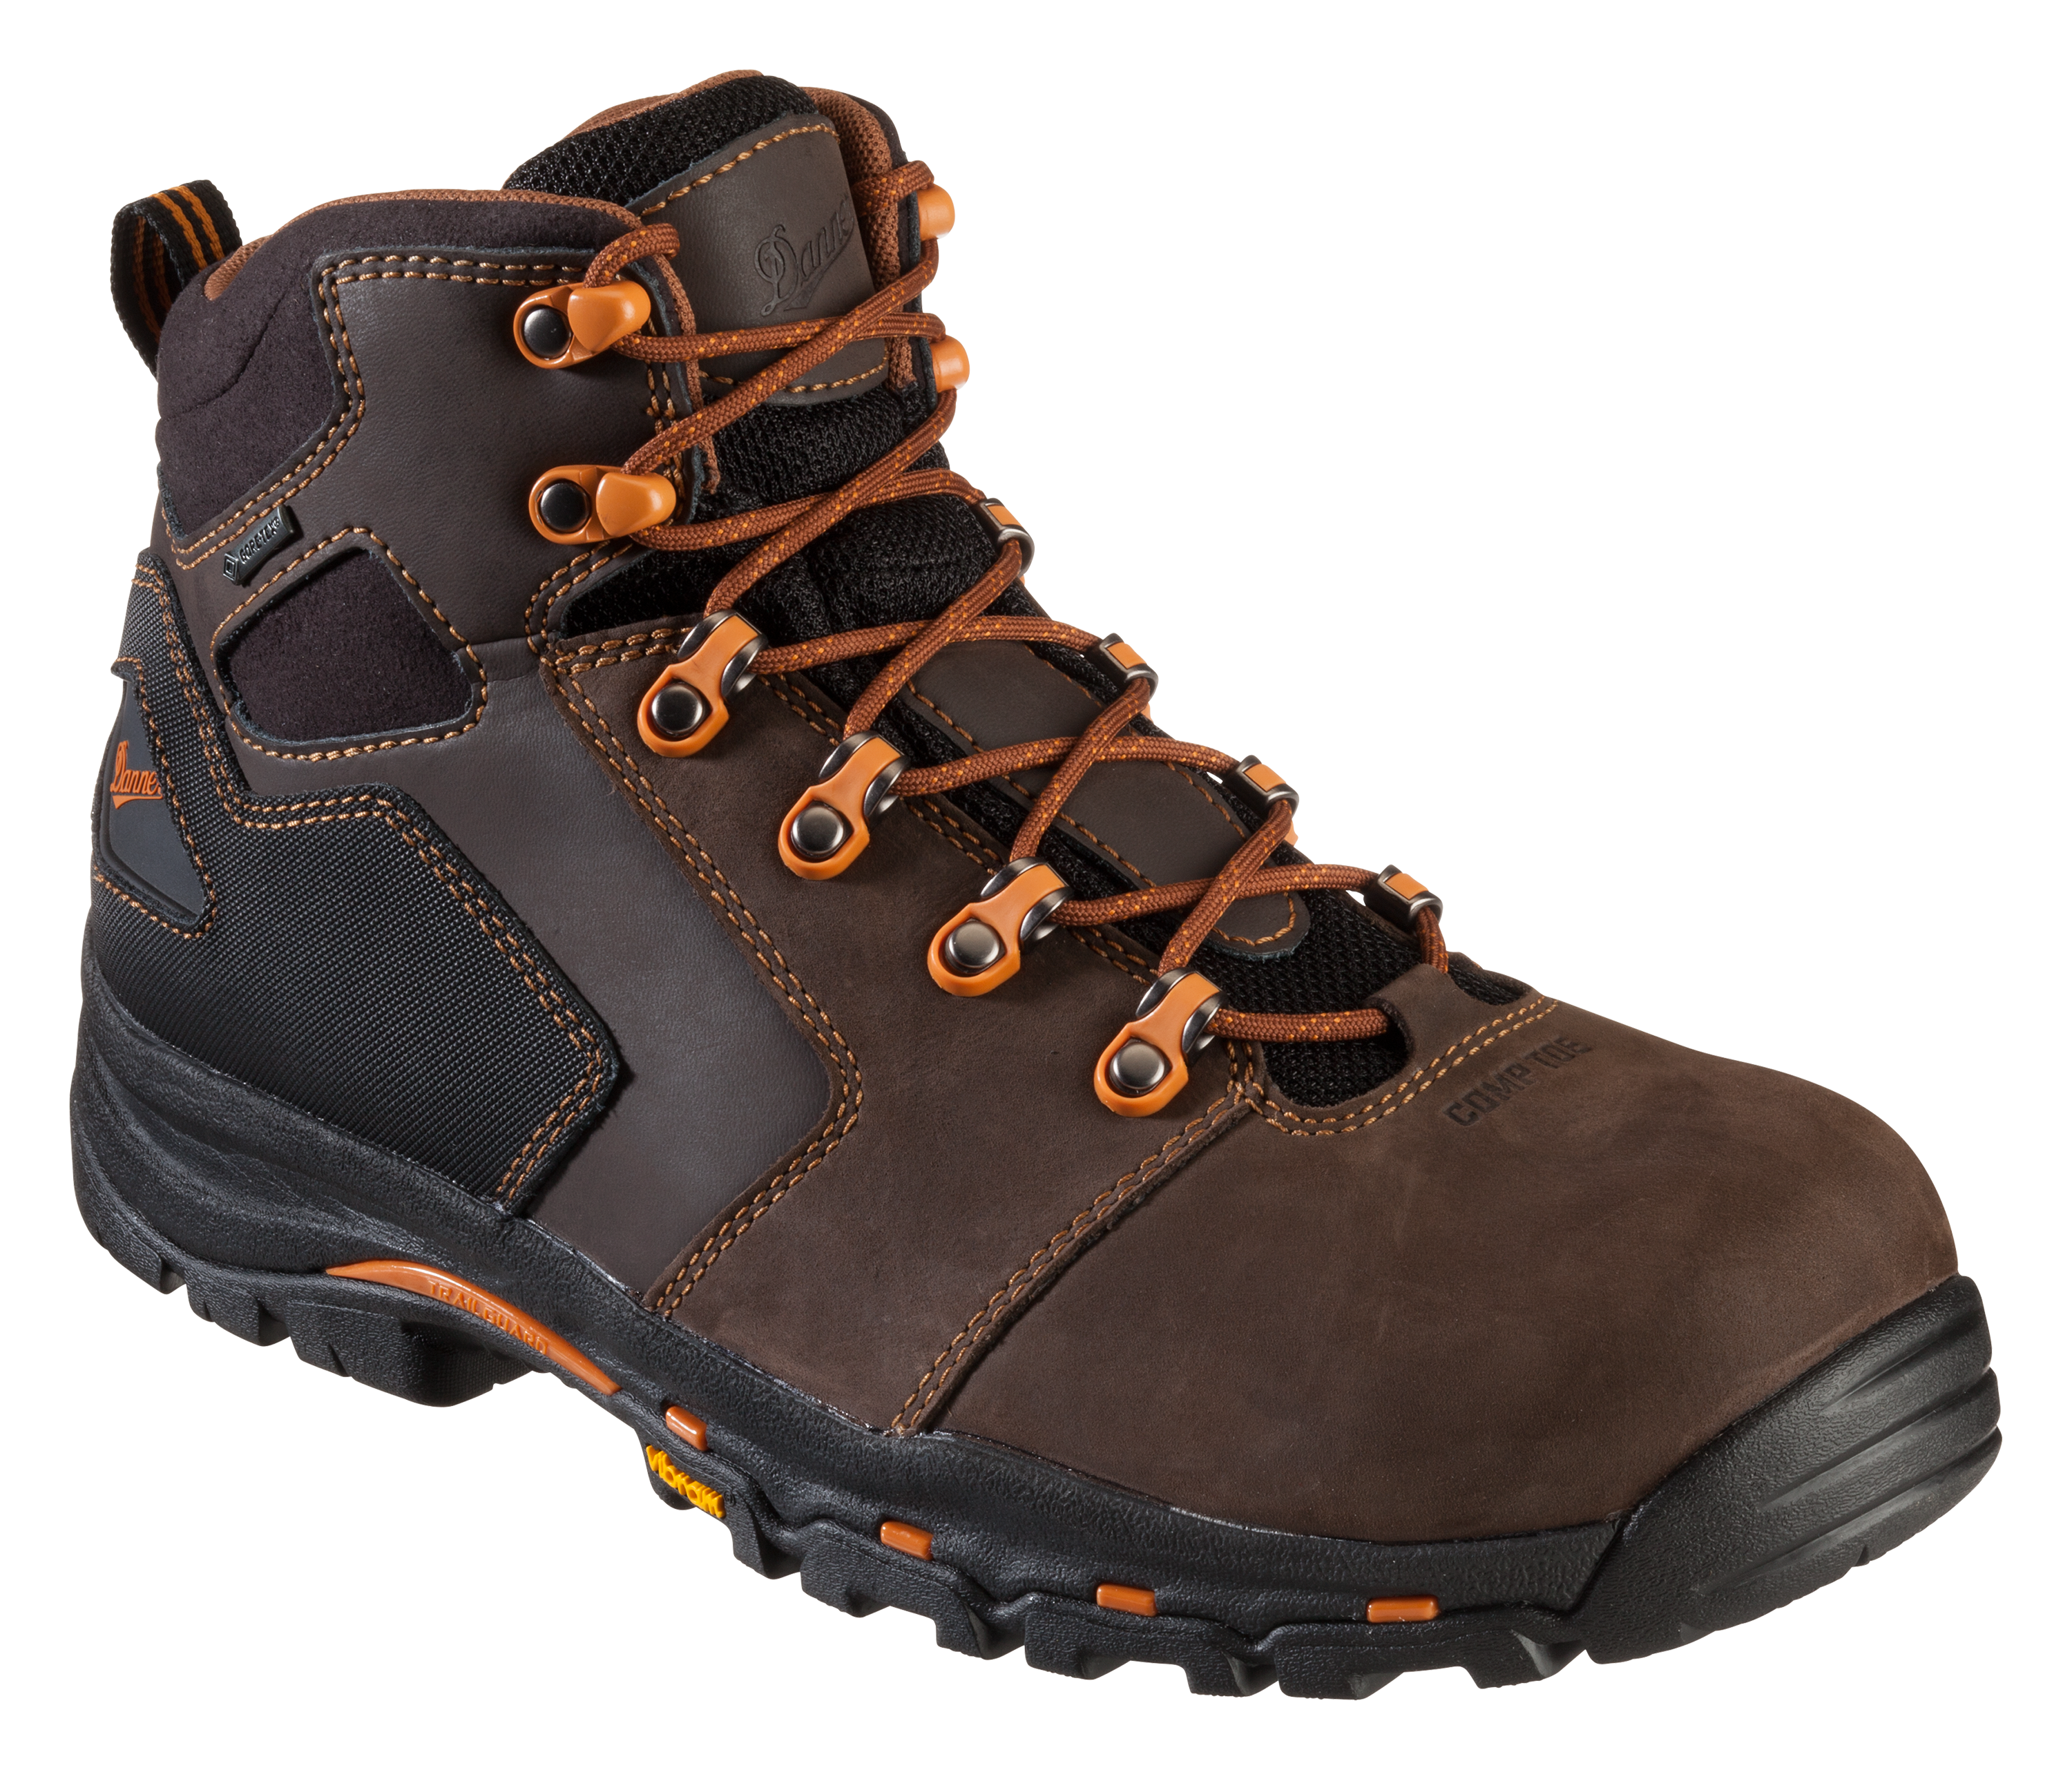 Danner Vicious GORE-TEX Non-Metallic Safety Toe Work Boots for Men - Brown - 10.5W